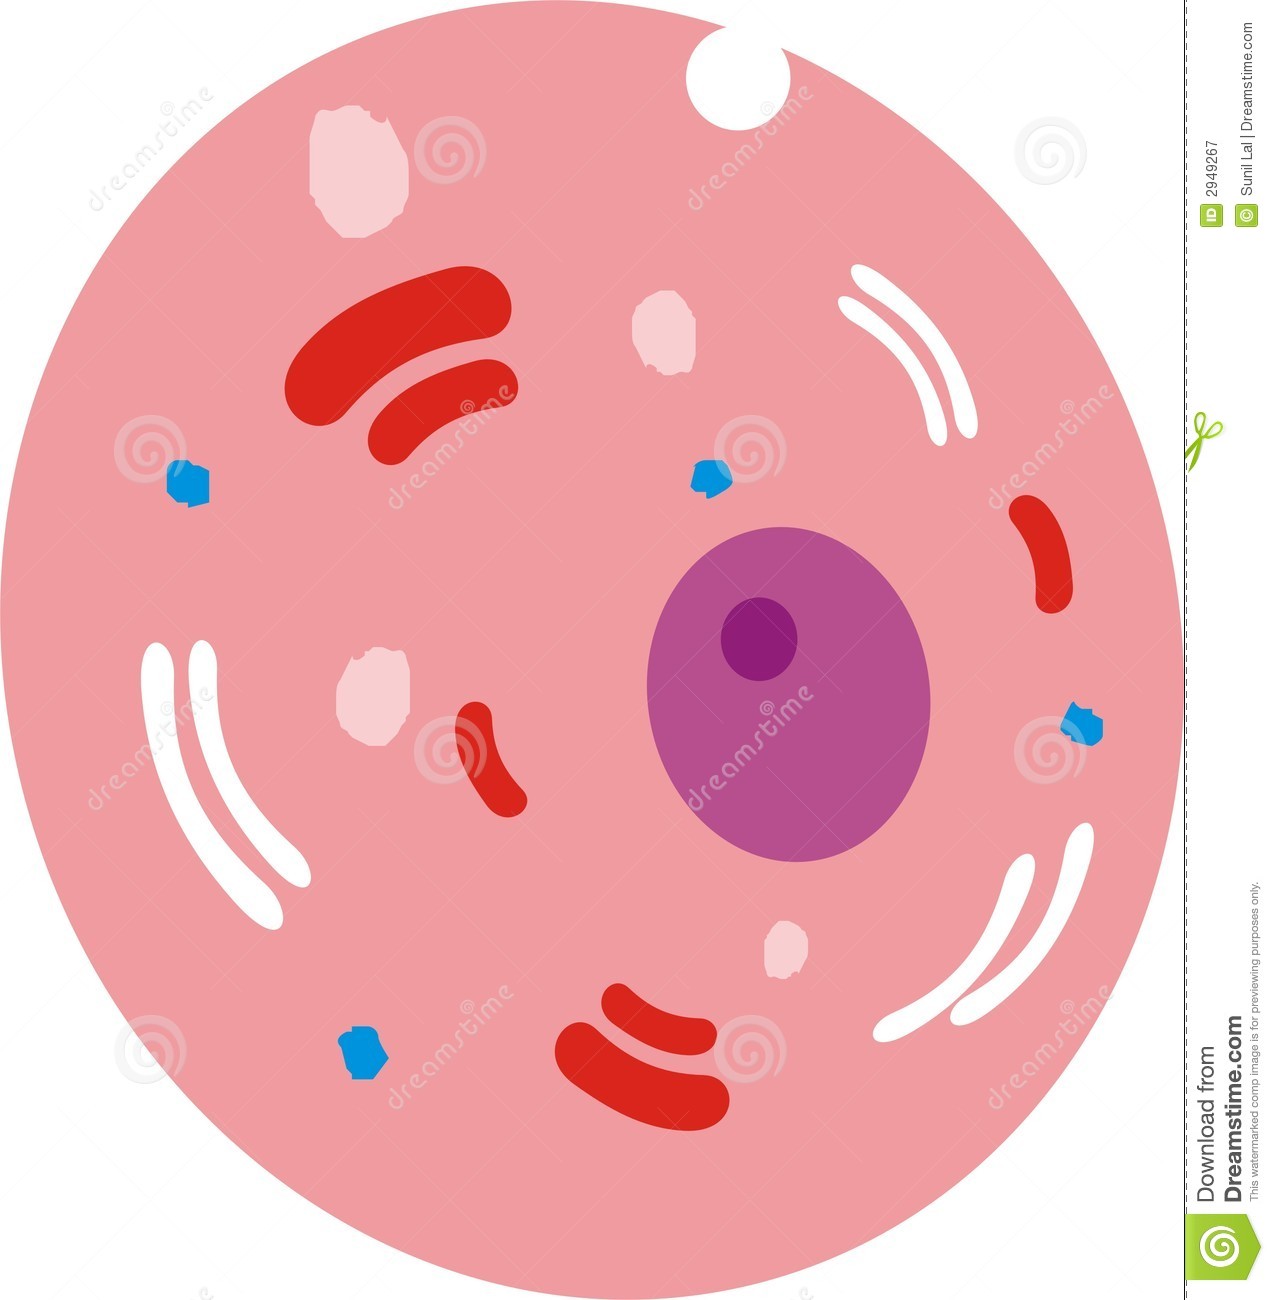 cells clipart body cell